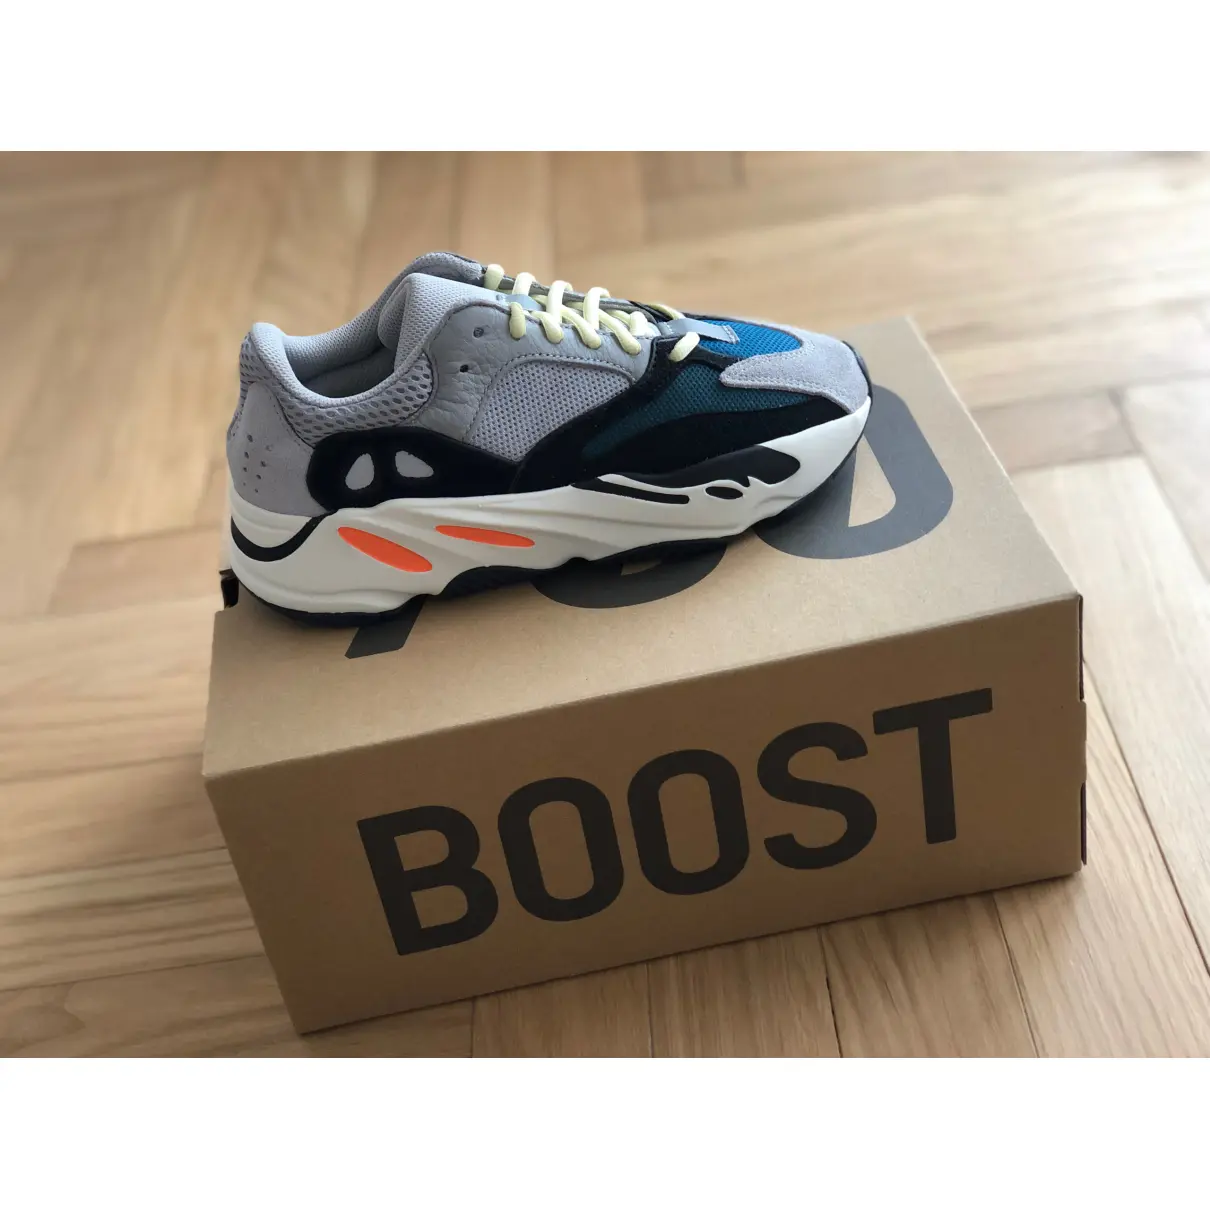 Boost 700 V1 trainers Yeezy x Adidas